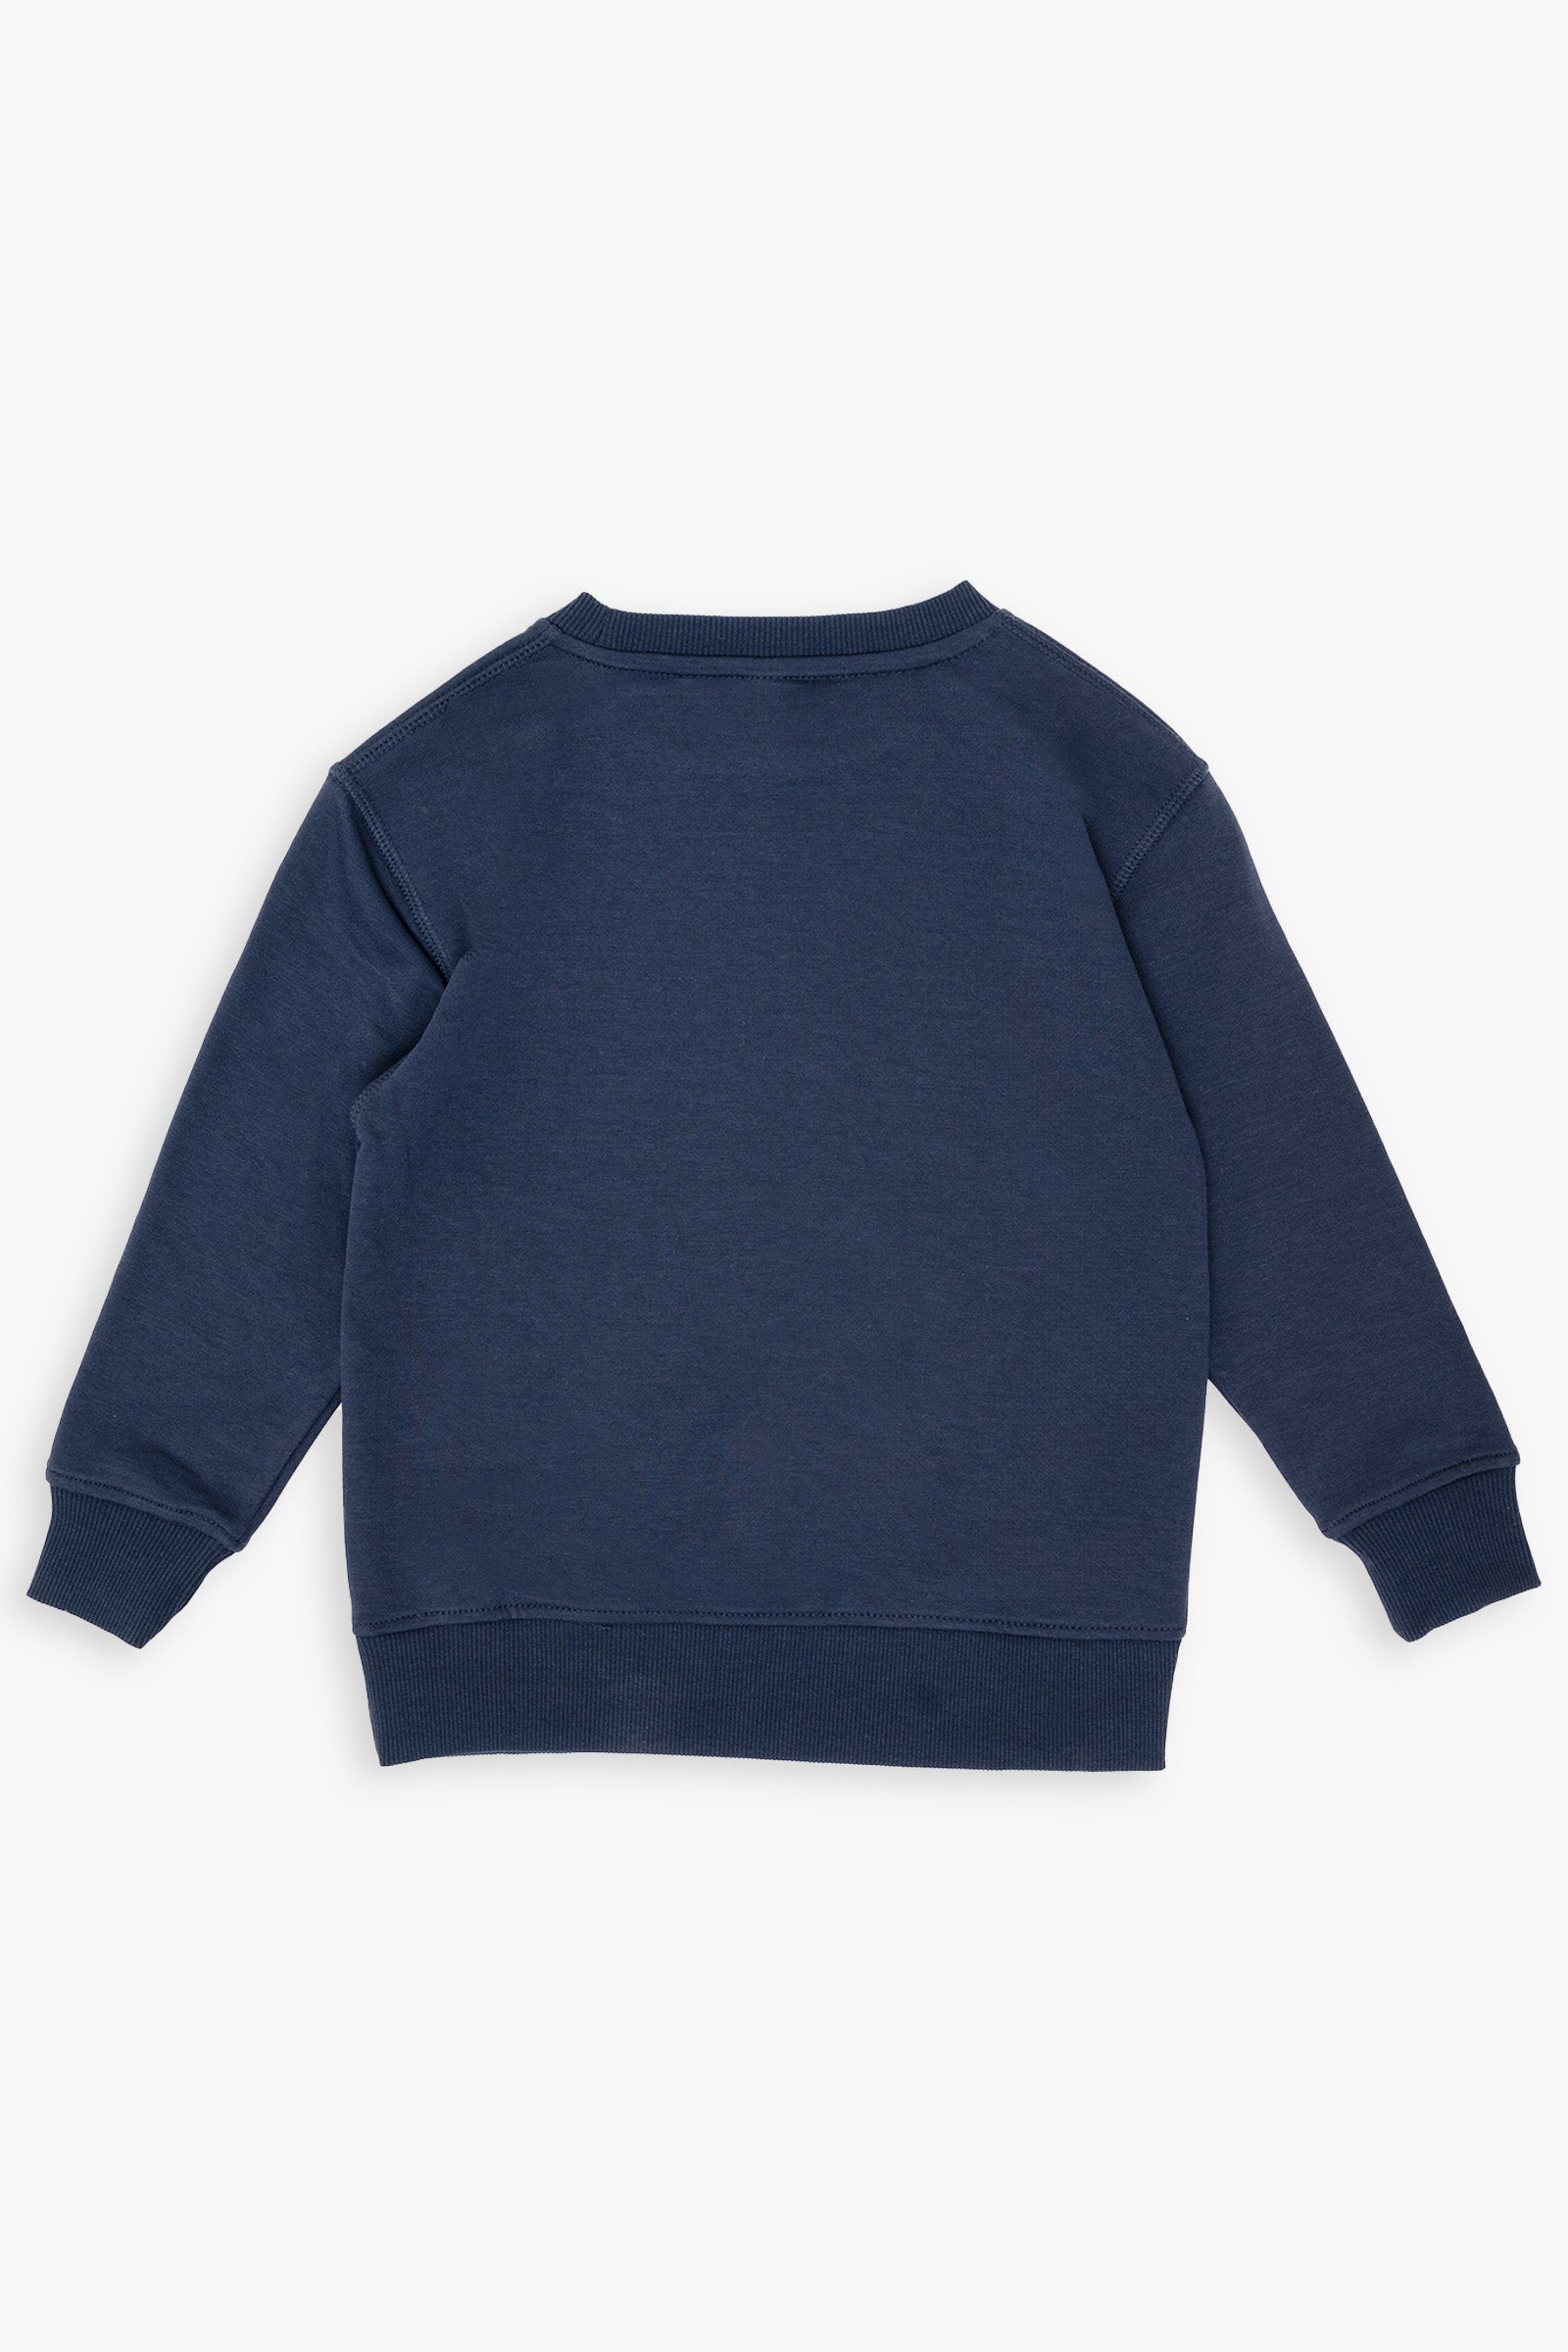 Gertex Youth Kids Unisex French Terry Cotton Crewneck